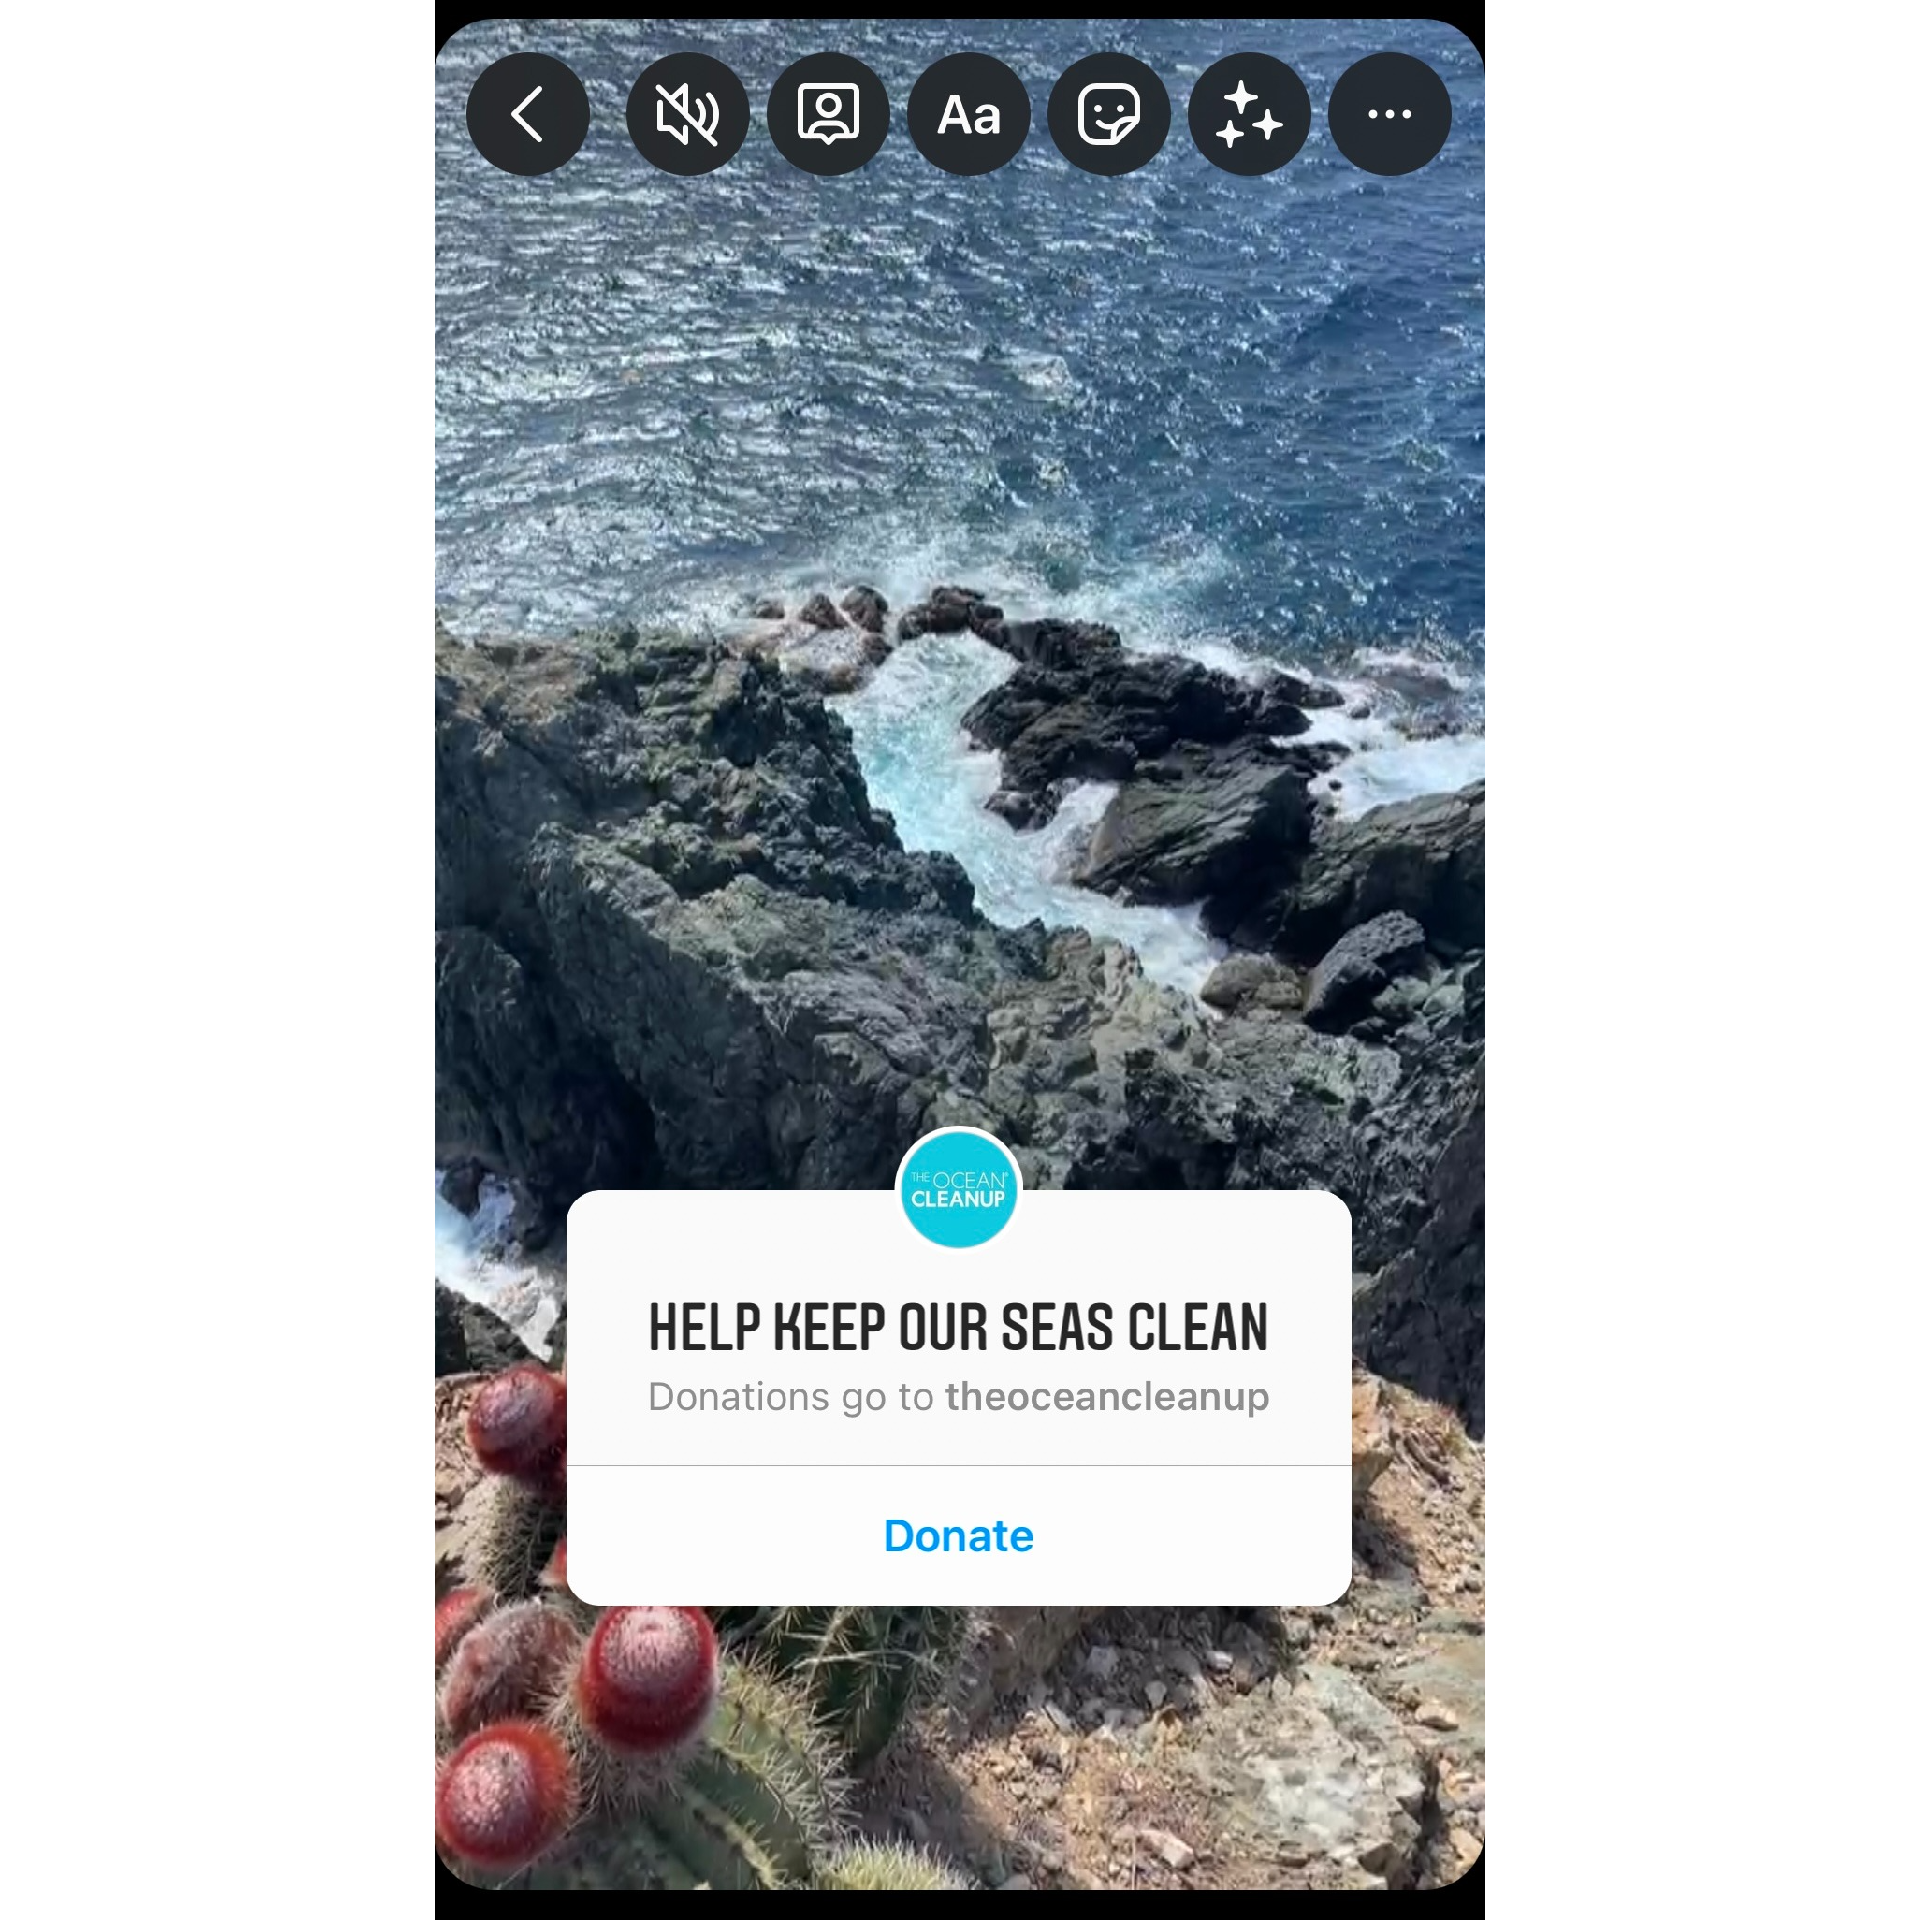 Publish the Donation Sticker to your Instagram Story.